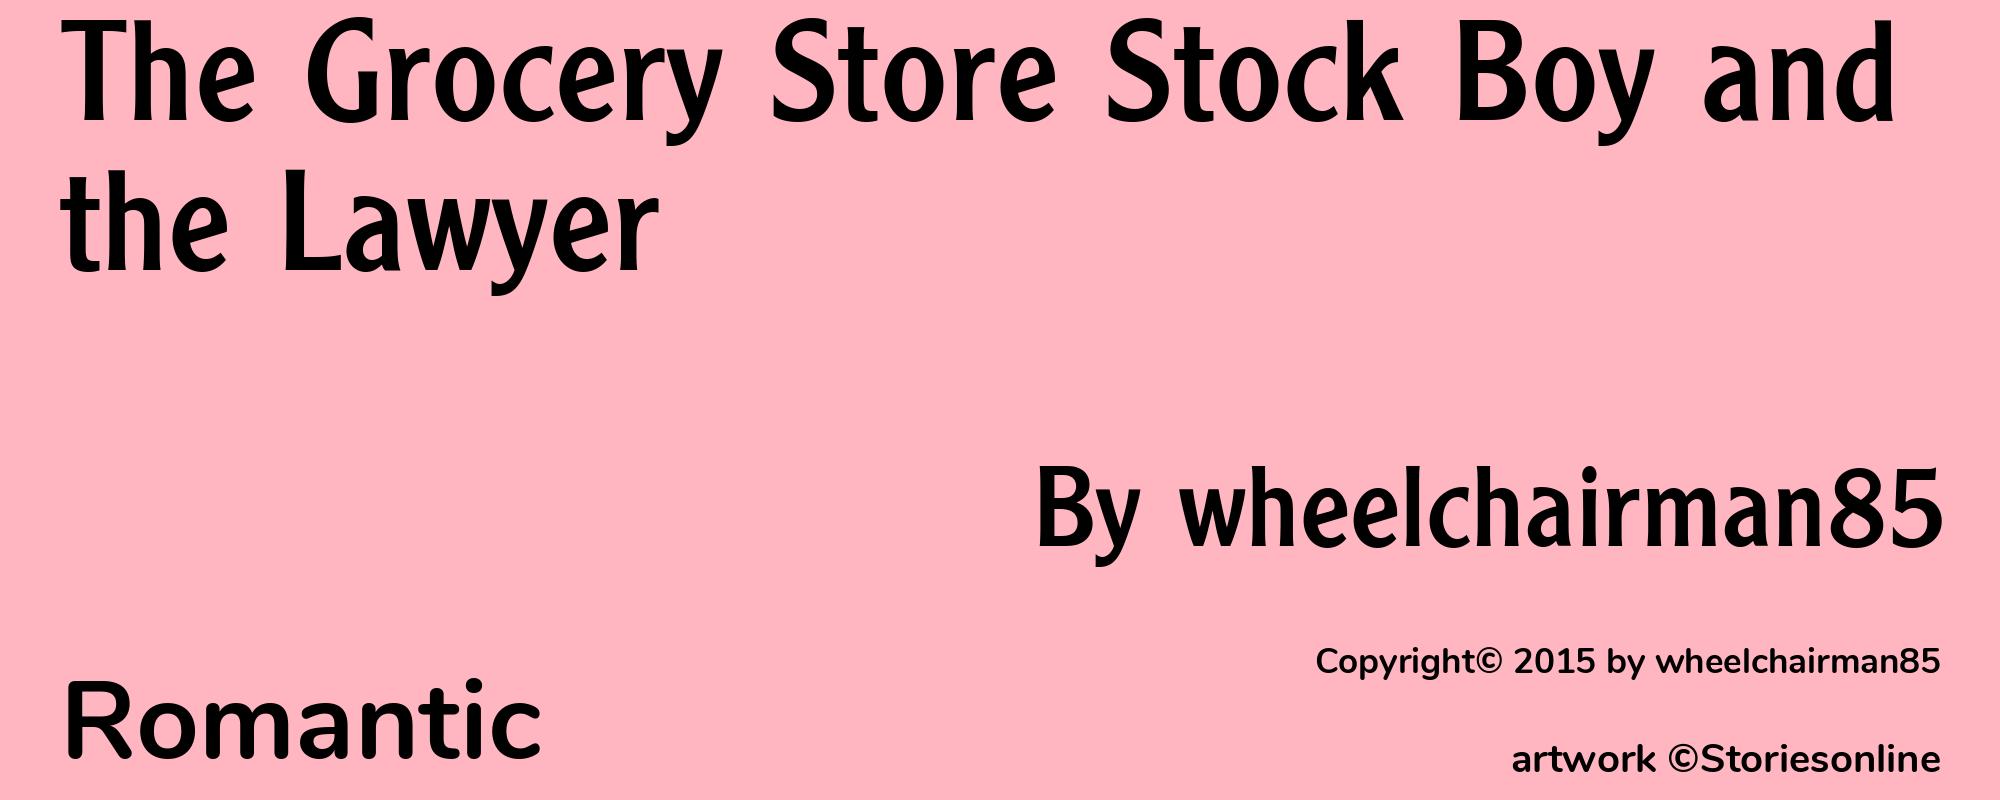 The Grocery Store Stock Boy and the Lawyer - Cover